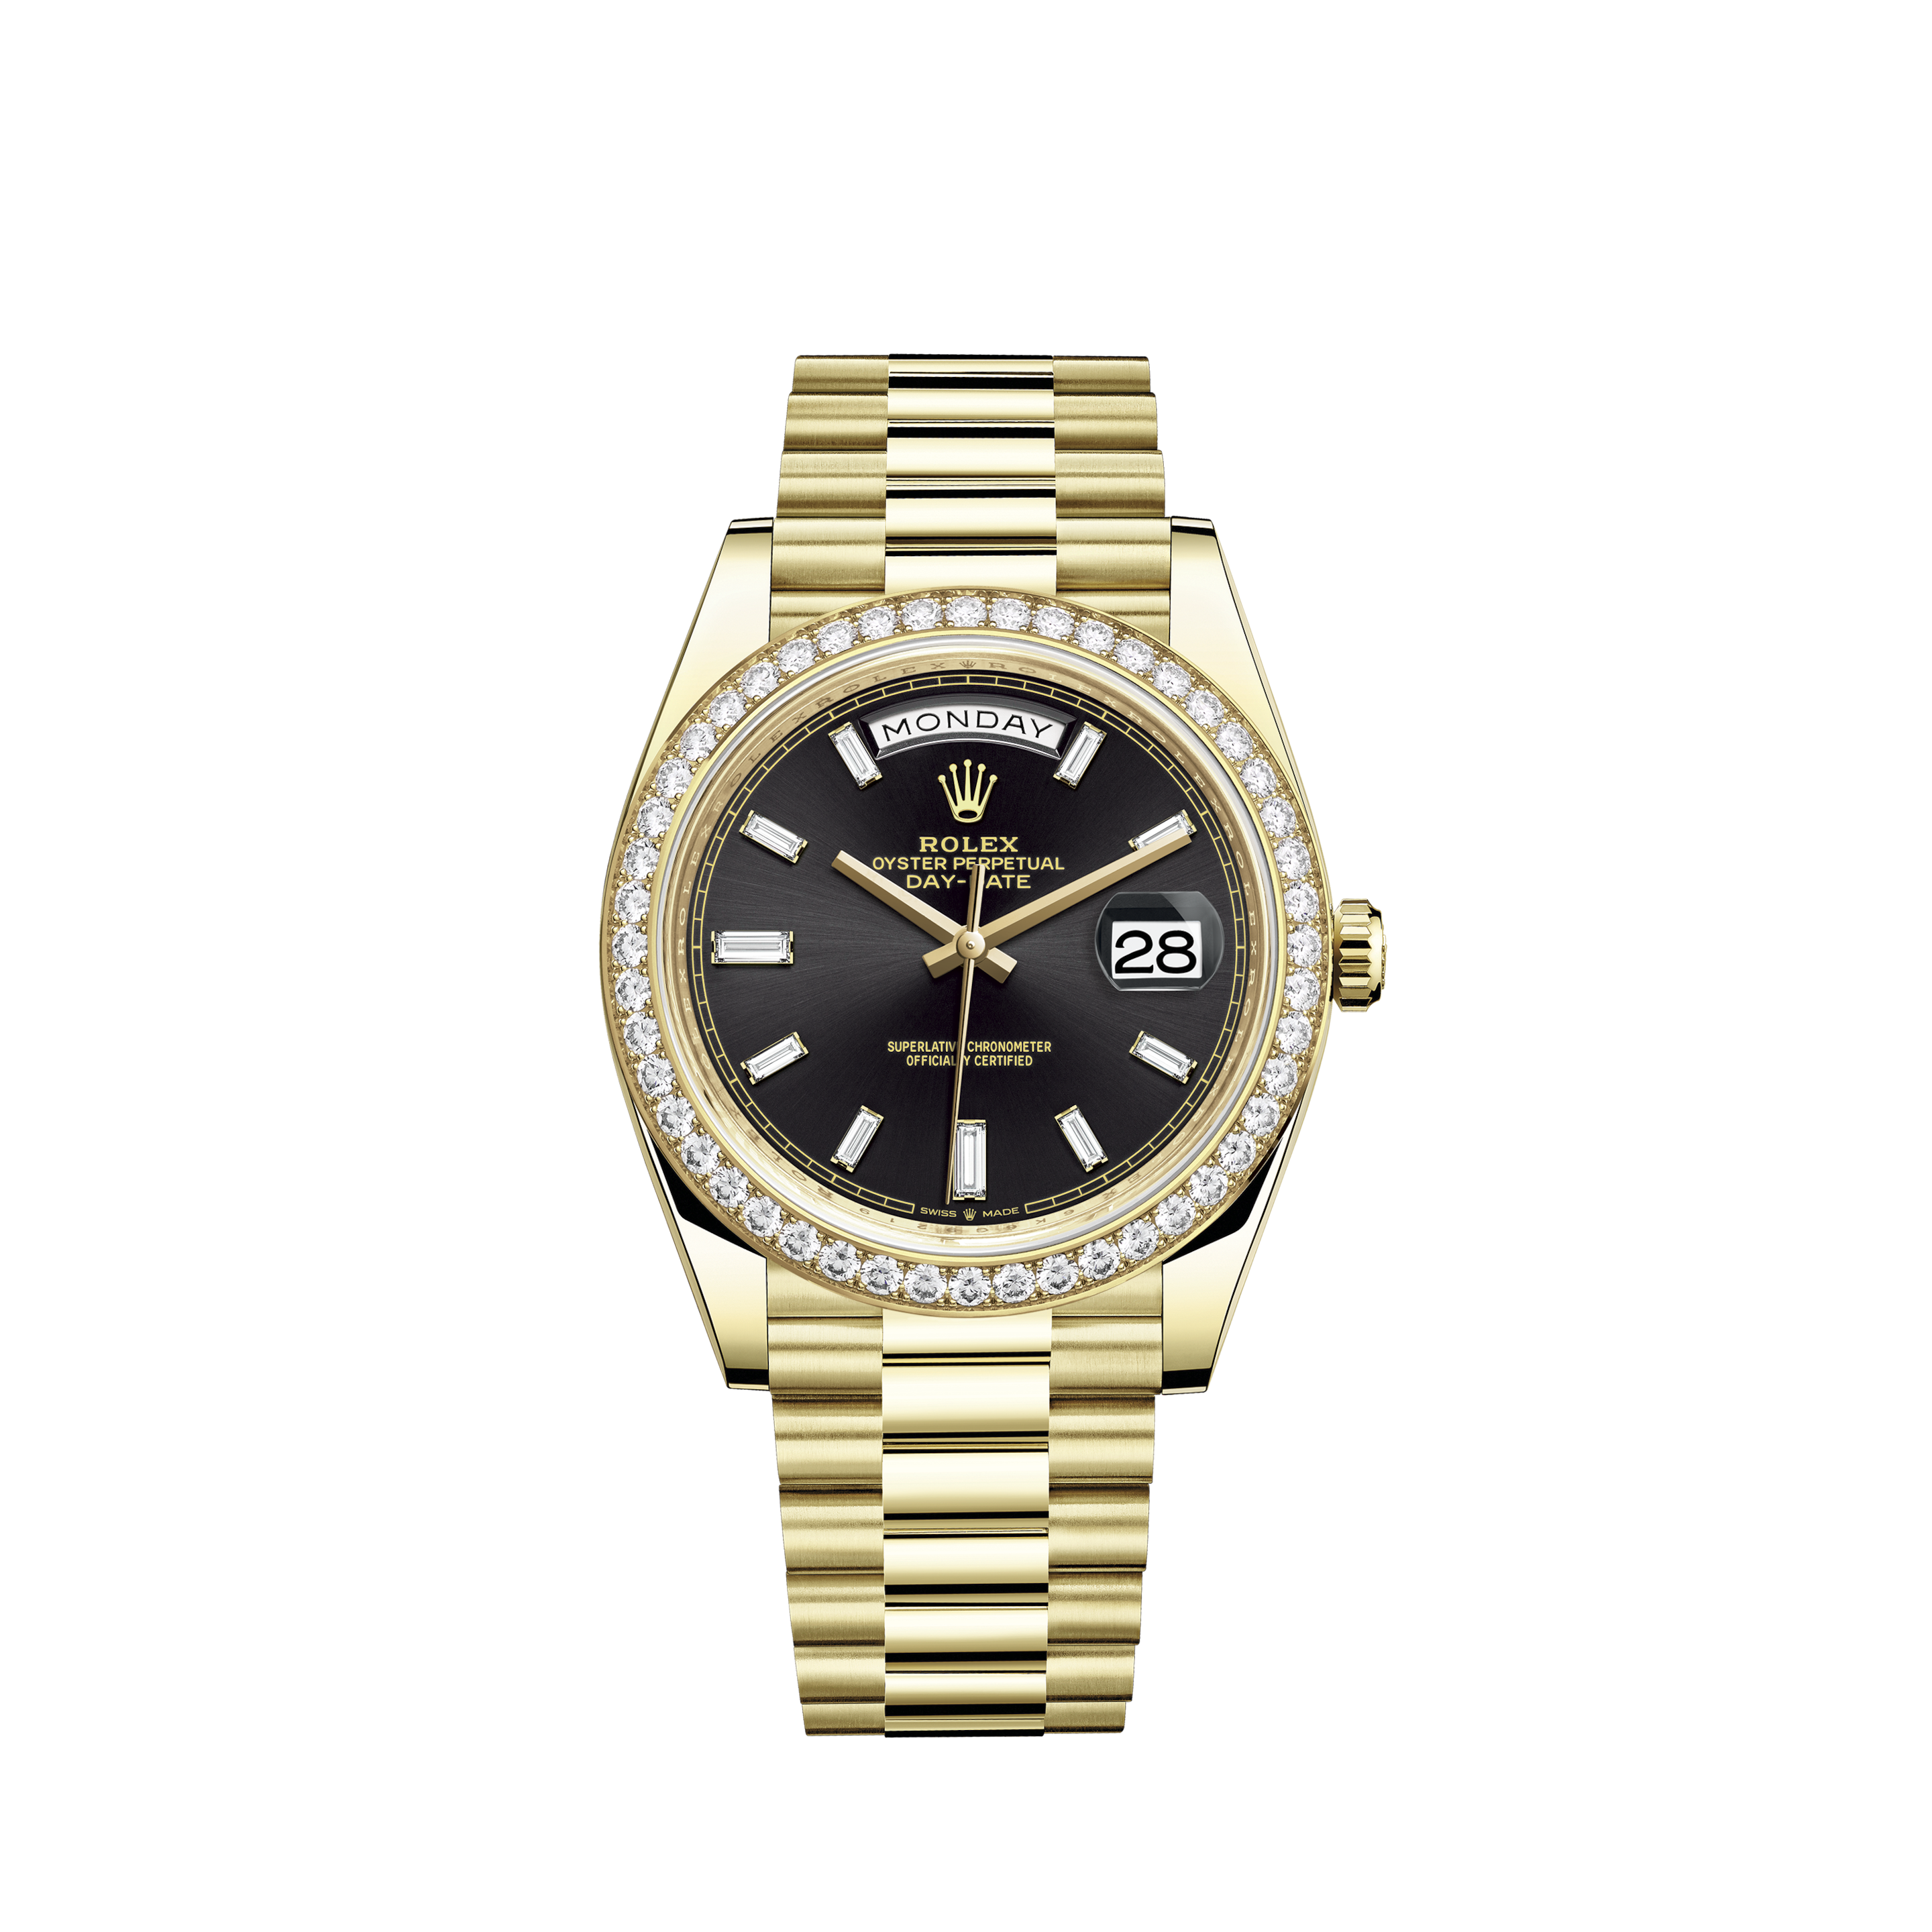 Rolex Oyster Perpetual Day-Date II brown dial 218239 brrp